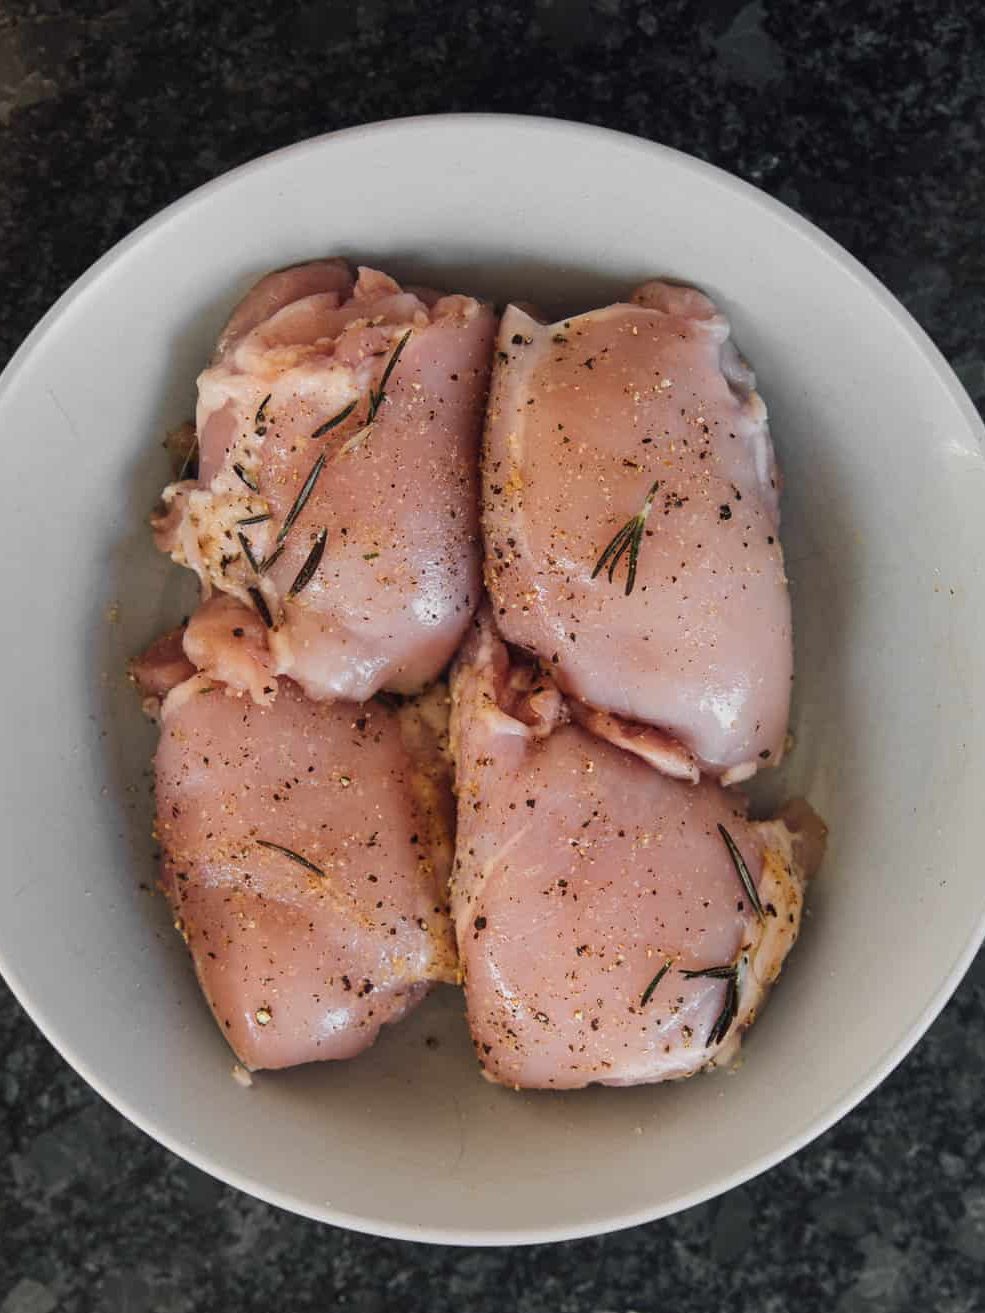 Pat your chicken thighs with a paper towel to remove any moisture and trim off excess fat.